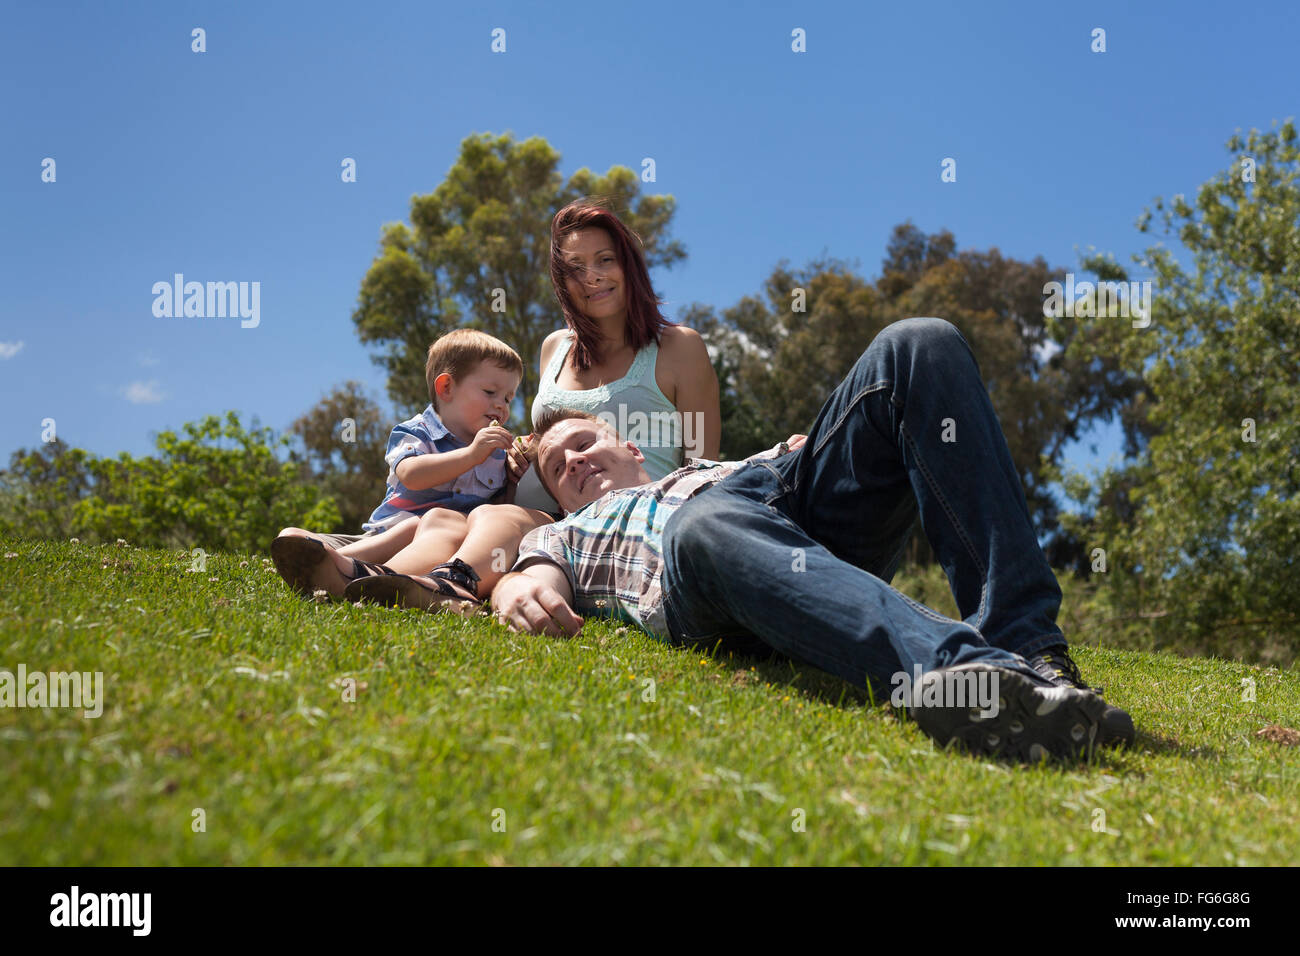 Young happy family relaxing in the grass and enjoying summer day outdoors. Stock Photo